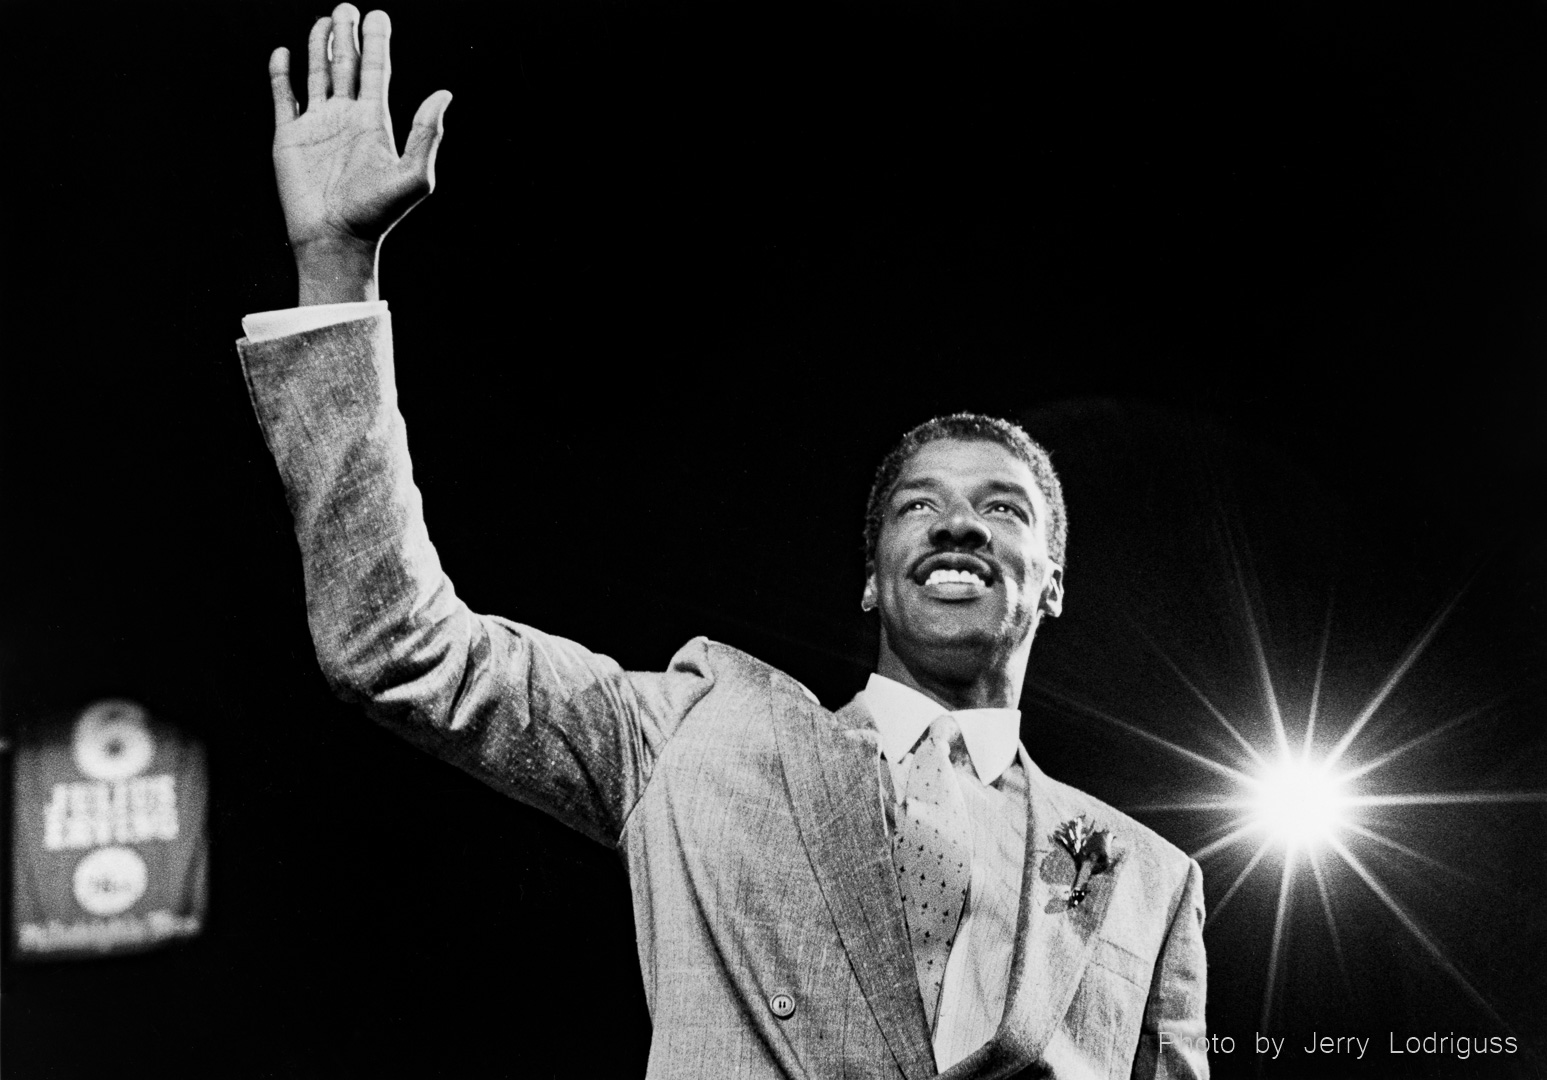 Julius Erving, "The Doctor", waves to the crowd during a standing ovation as his number 6 jersey is retired and raised to the rafters in the Spectrum in Philadelphia on  April 18, 1988.